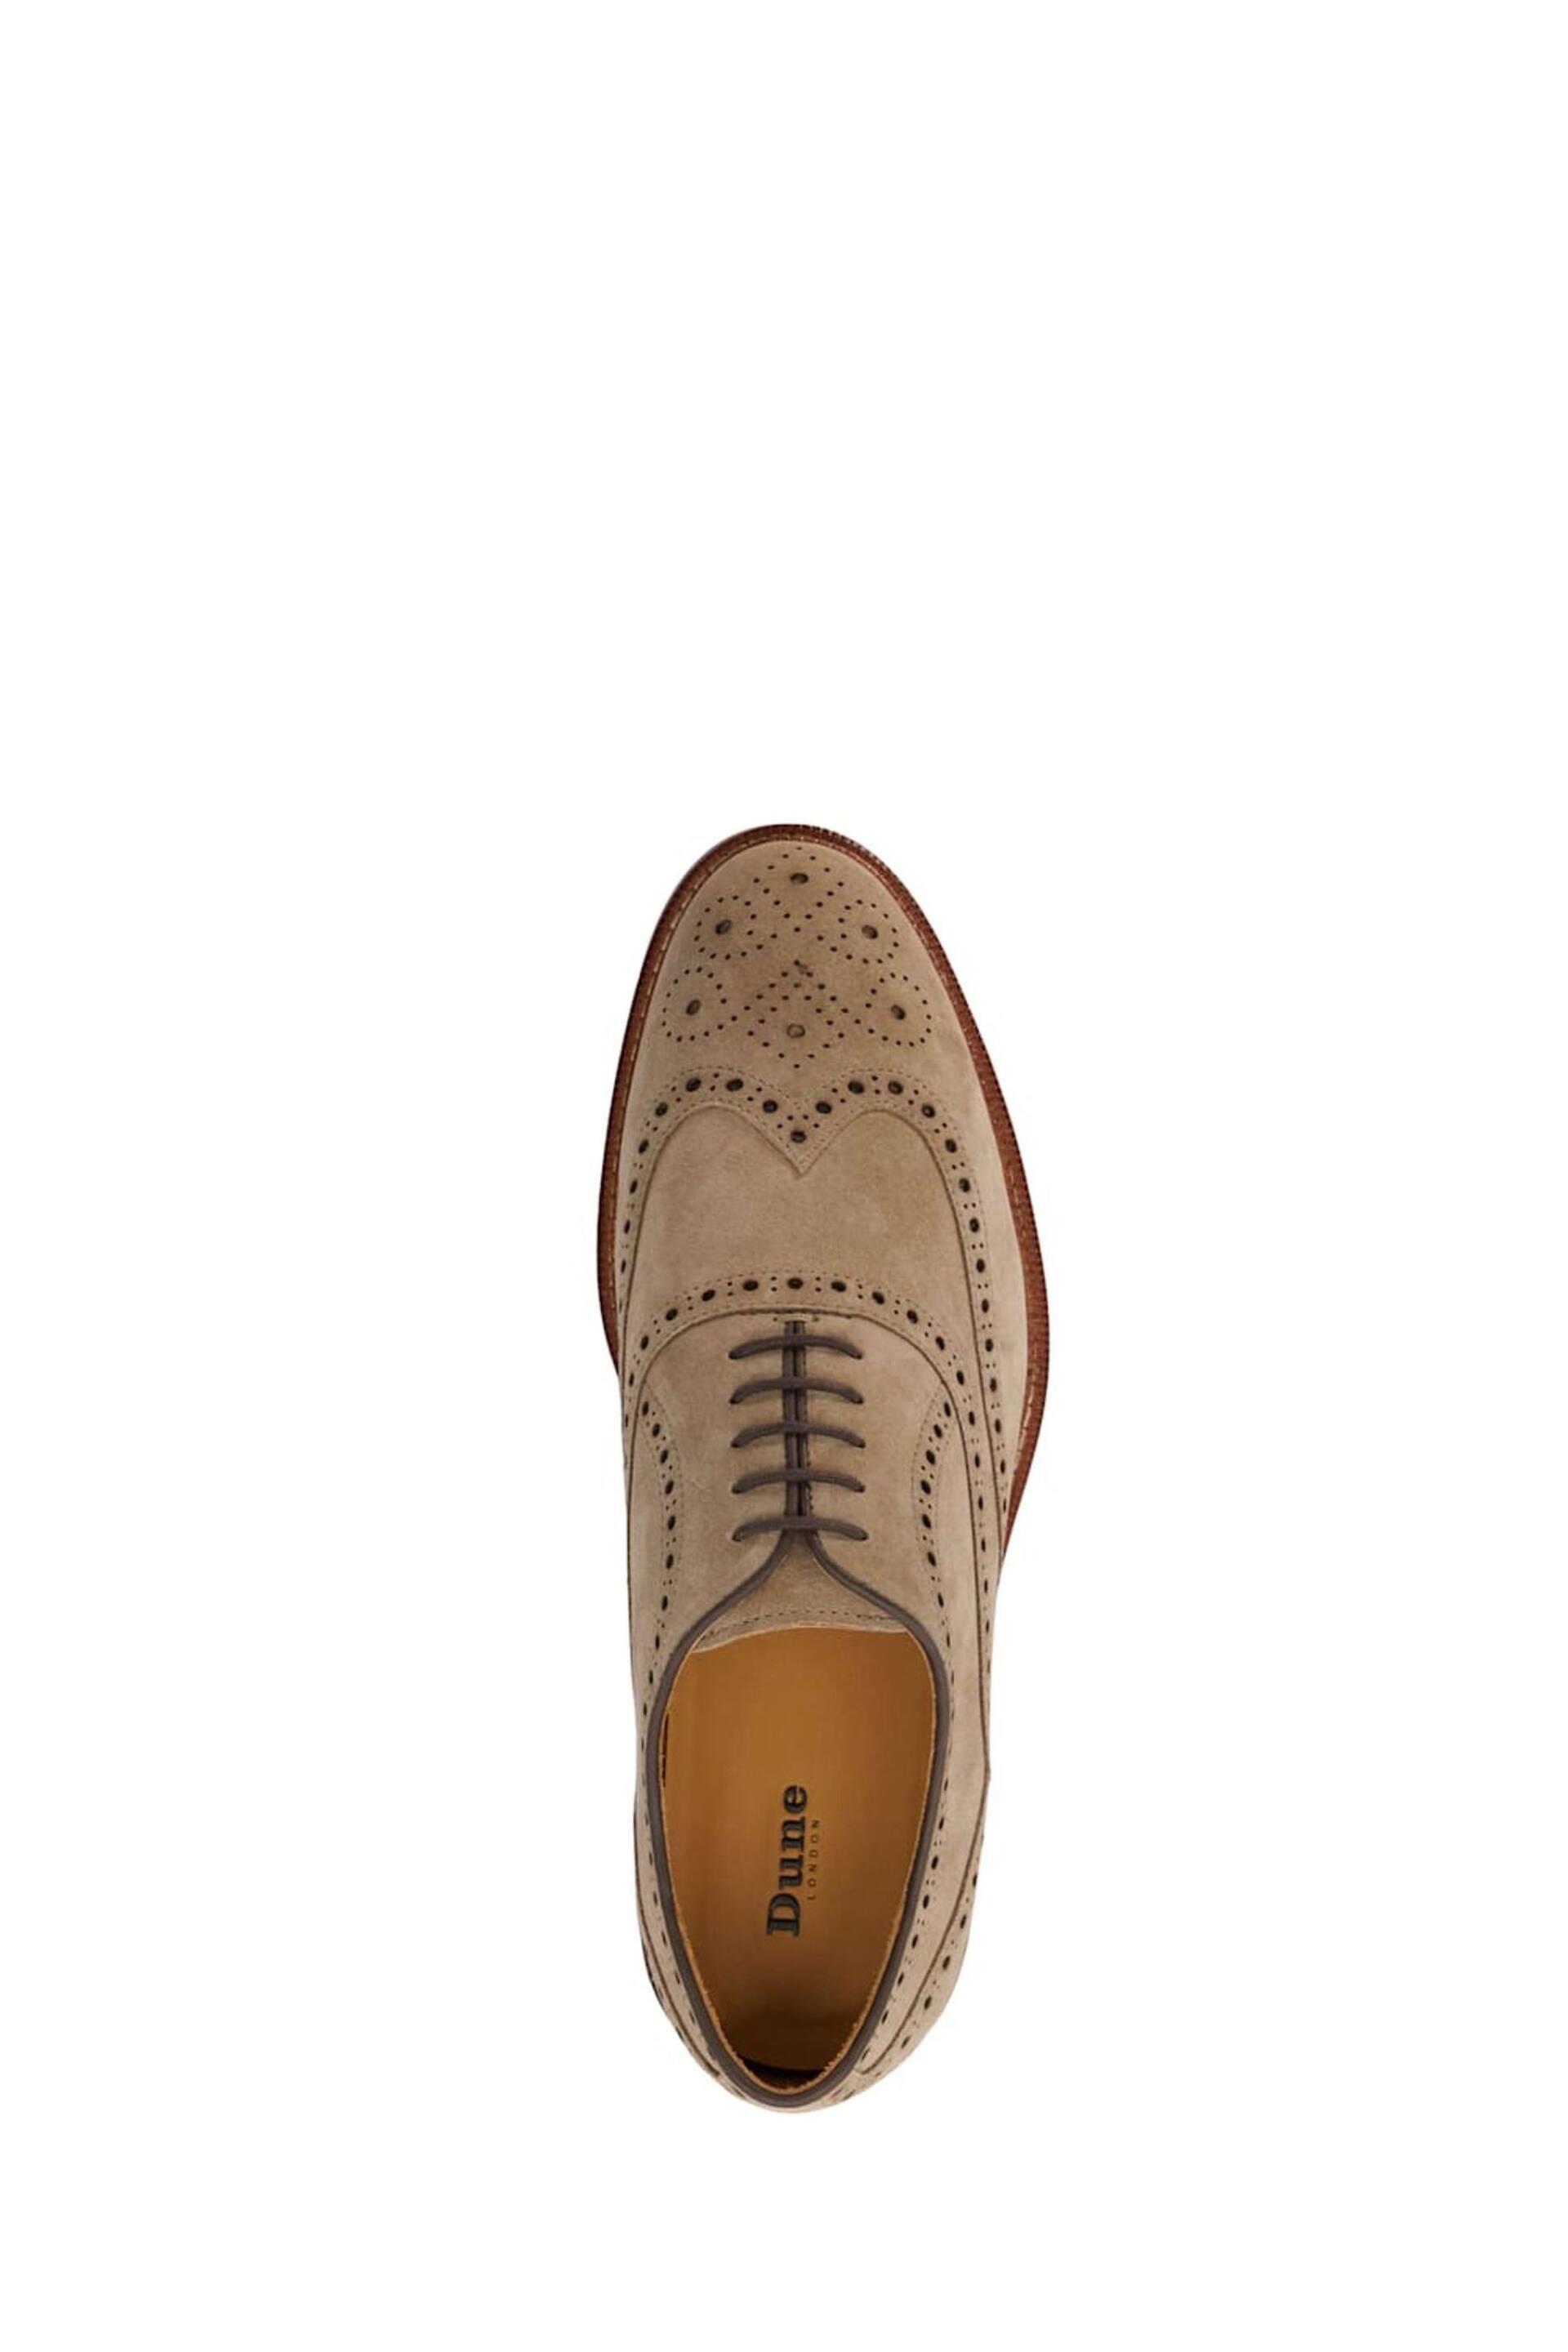 Dune London Brown Ground Solihull Oxford Brogues - Image 6 of 6